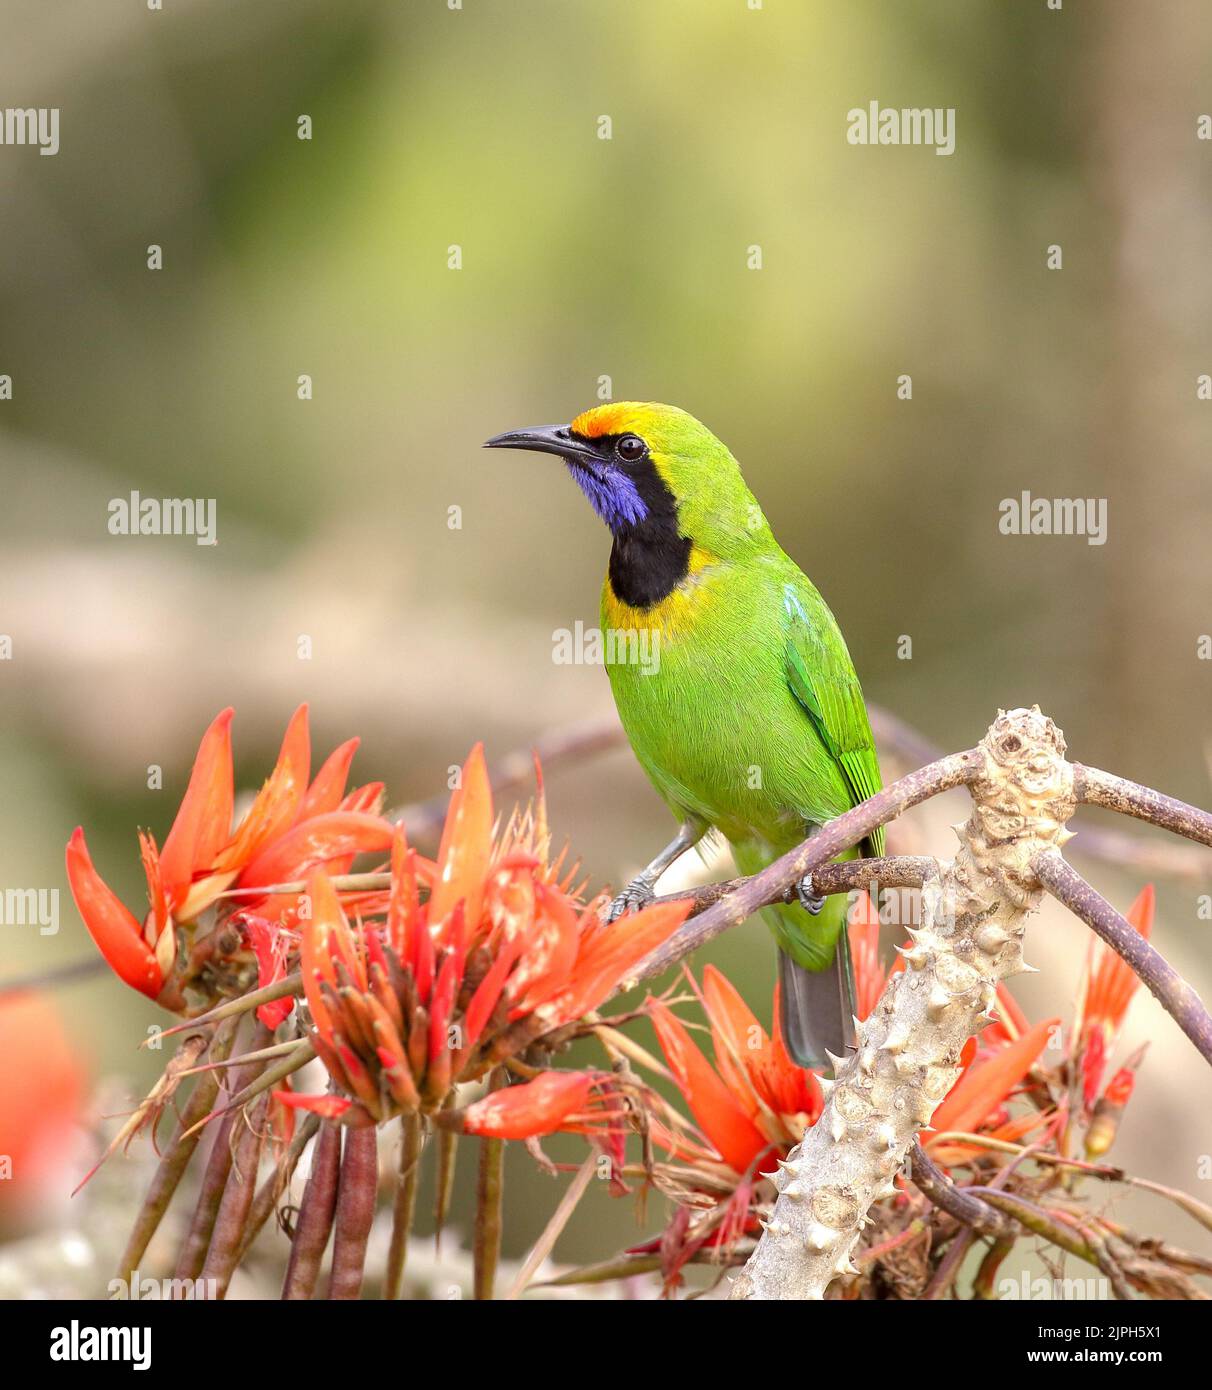 Golden-fronted leafbird is a species of leafbird. It is found from the Indian subcontinent and south-western China, to south-east Asia and Sumatra. Stock Photo